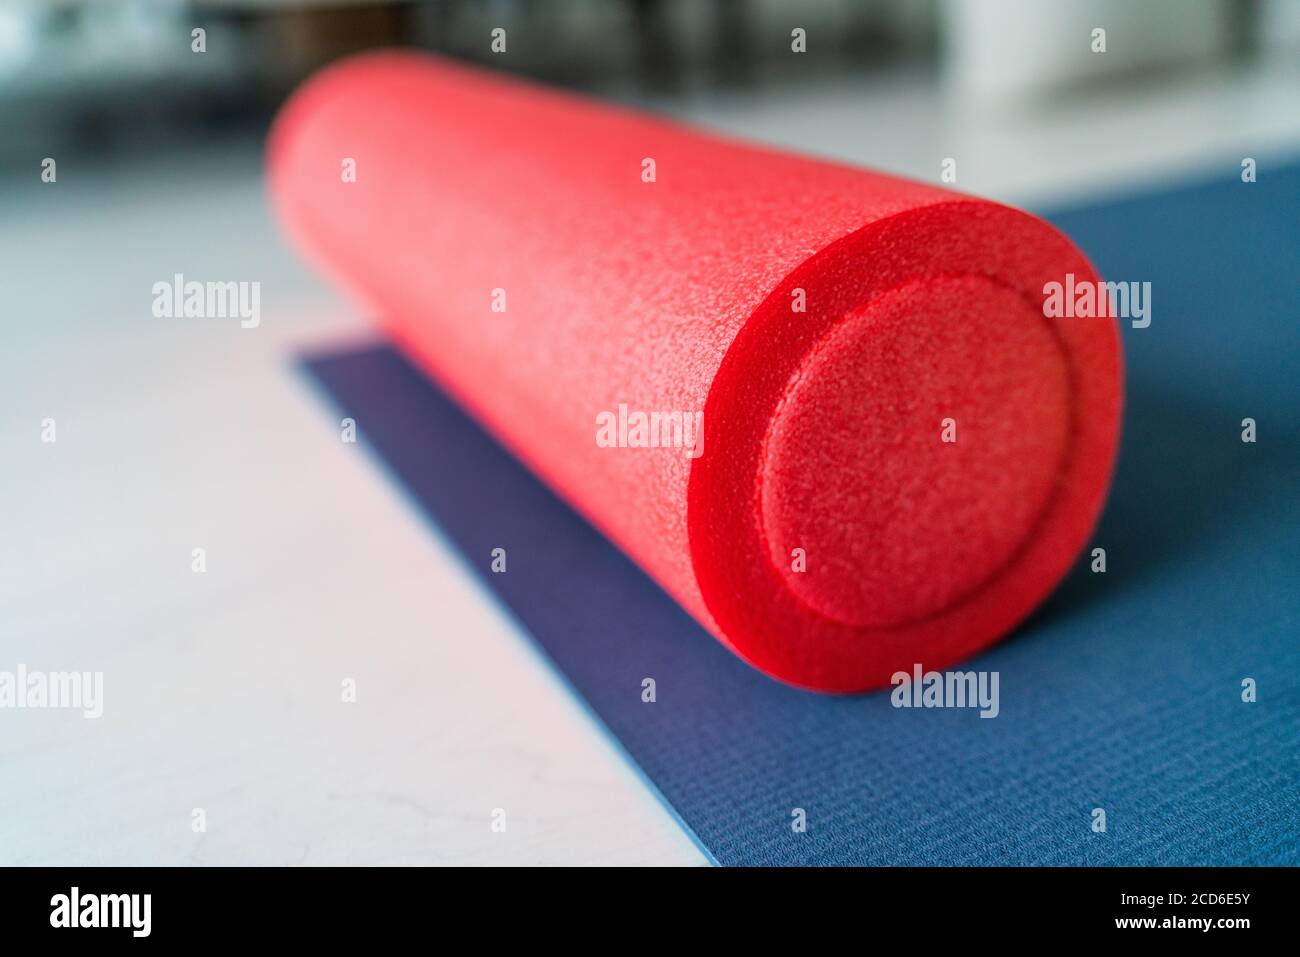 Foam roller fitness equipment on exercise mat gym floor. Indoors closeup of sports object, accessory for athletes to massage tired and tense muscles Stock Photo